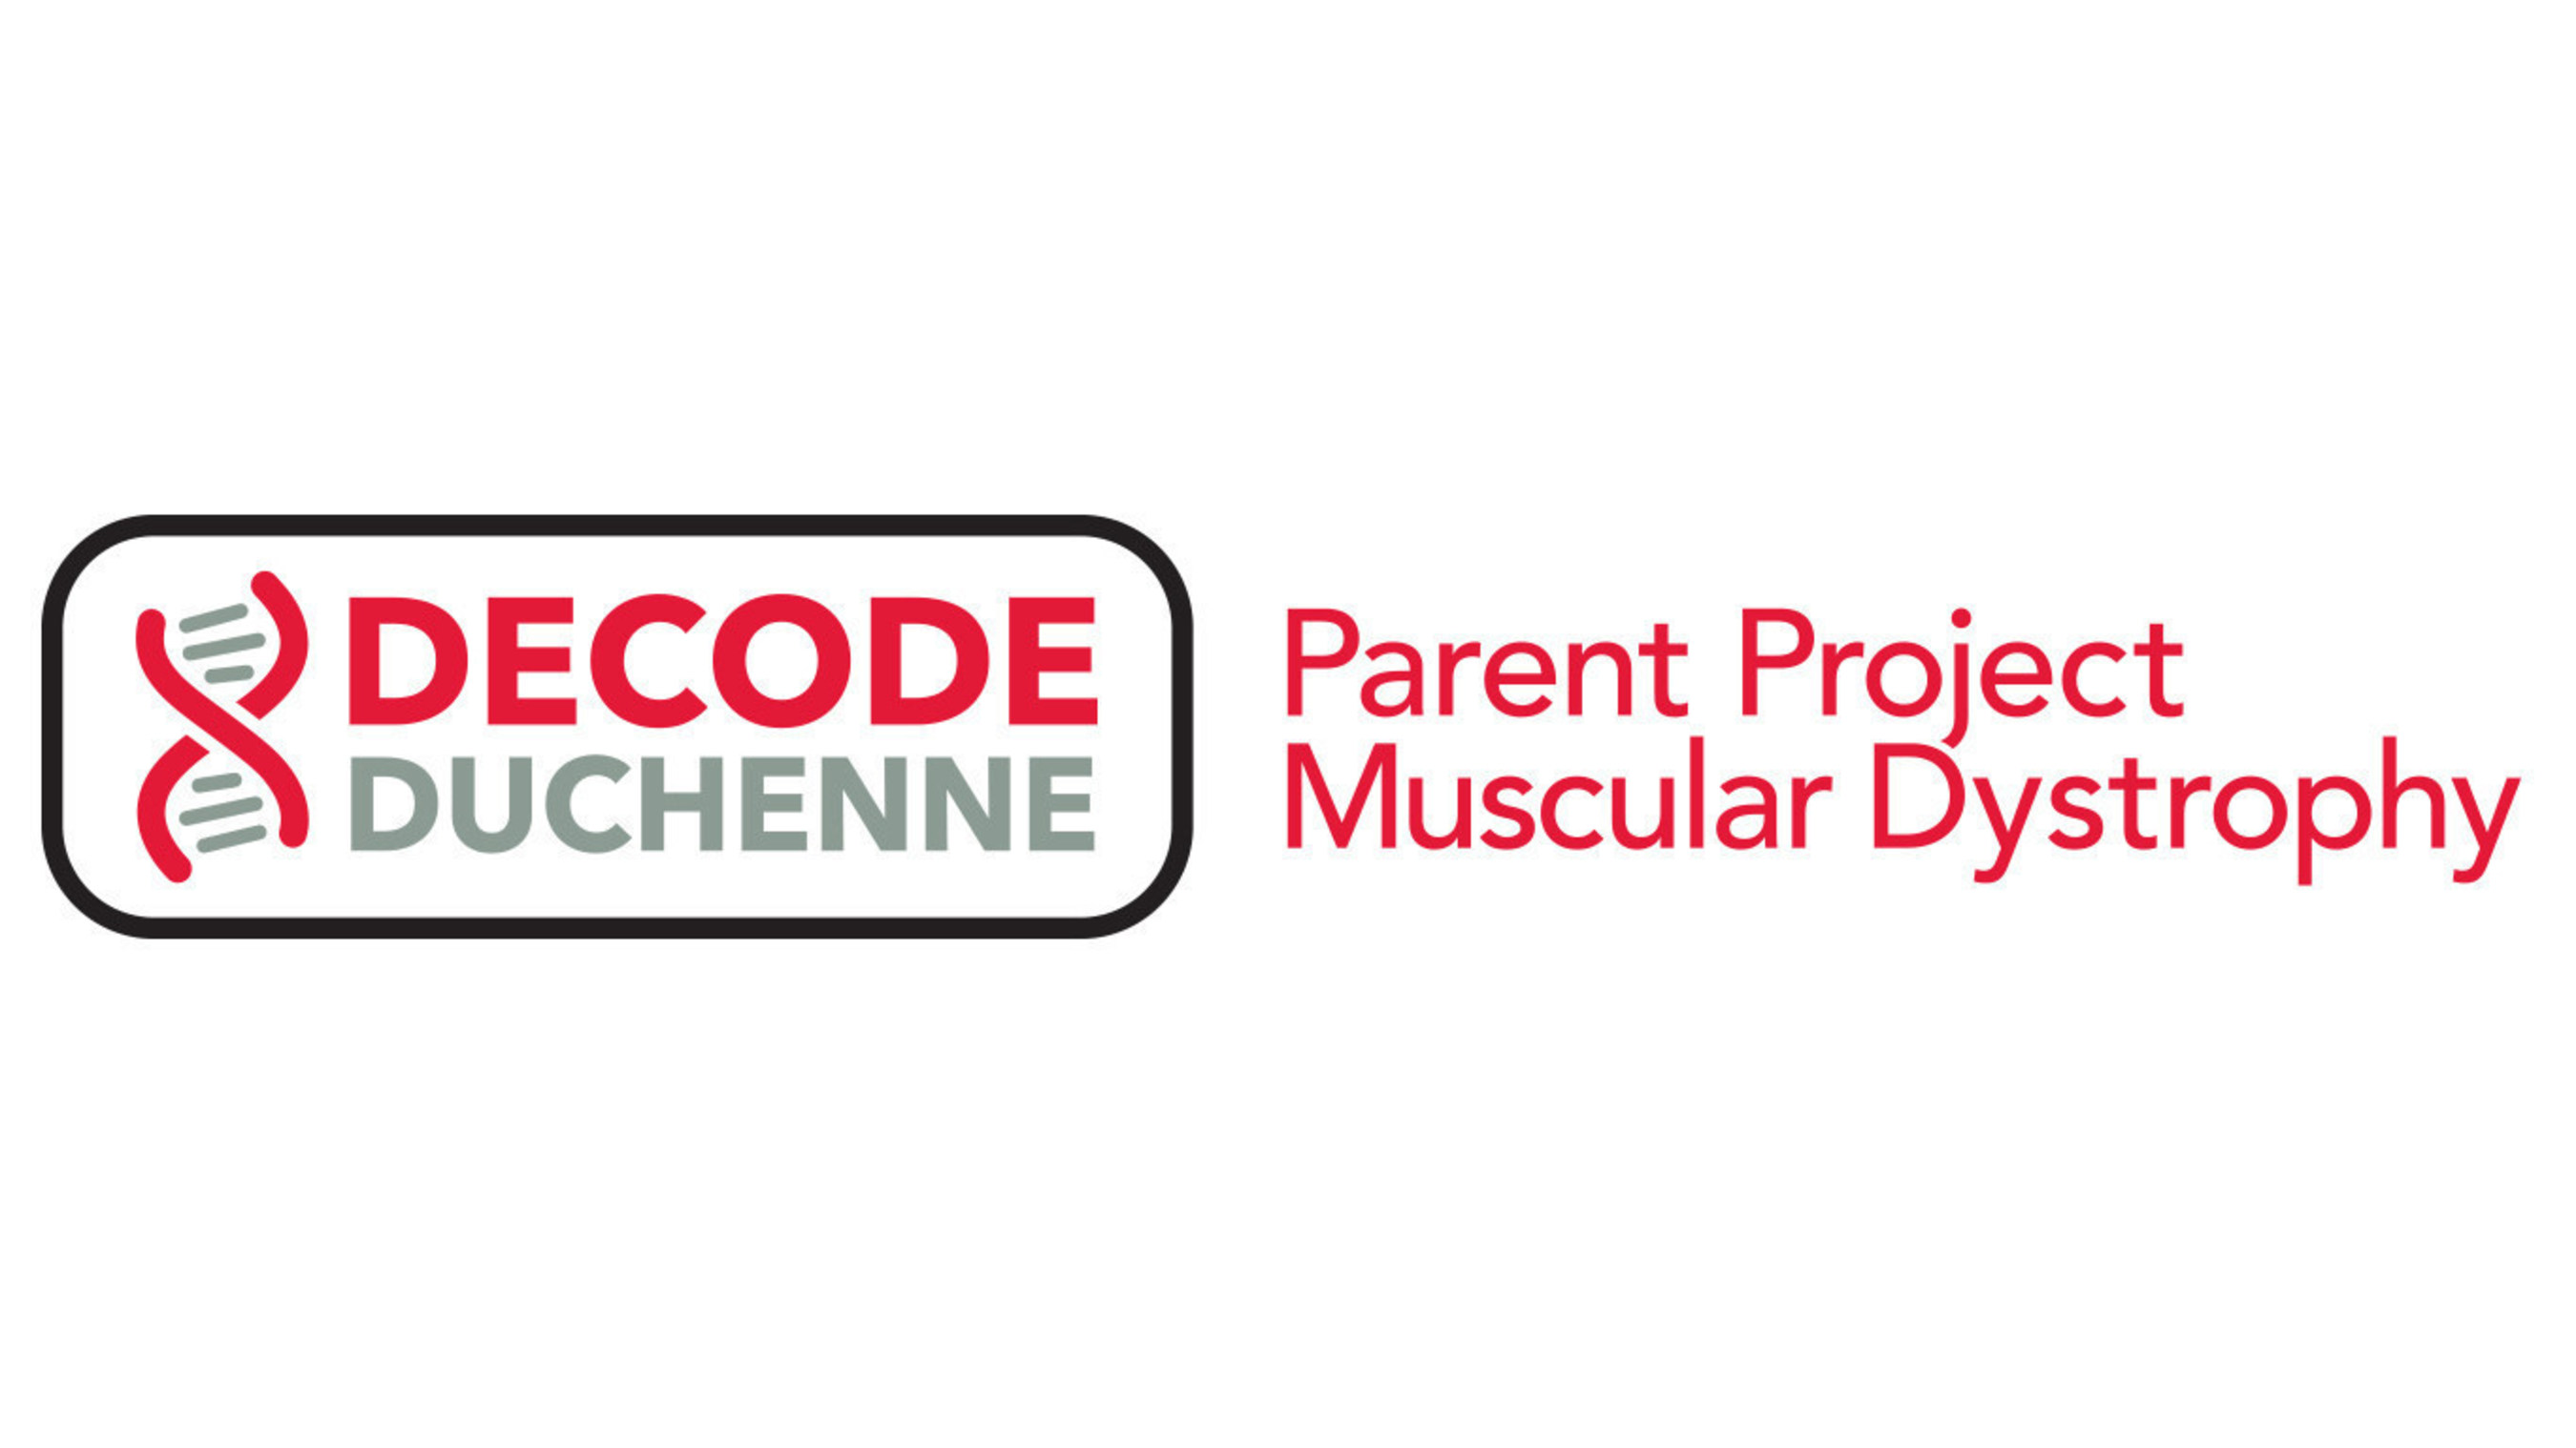 Parent Project Muscular Dystrophy Launches Next Phase of Genetic Testing Program, Decode Duchenne in collaboration with BioMarin Pharmaceutical Inc., PTC Therapeutics, and Sarepta Therapeutics